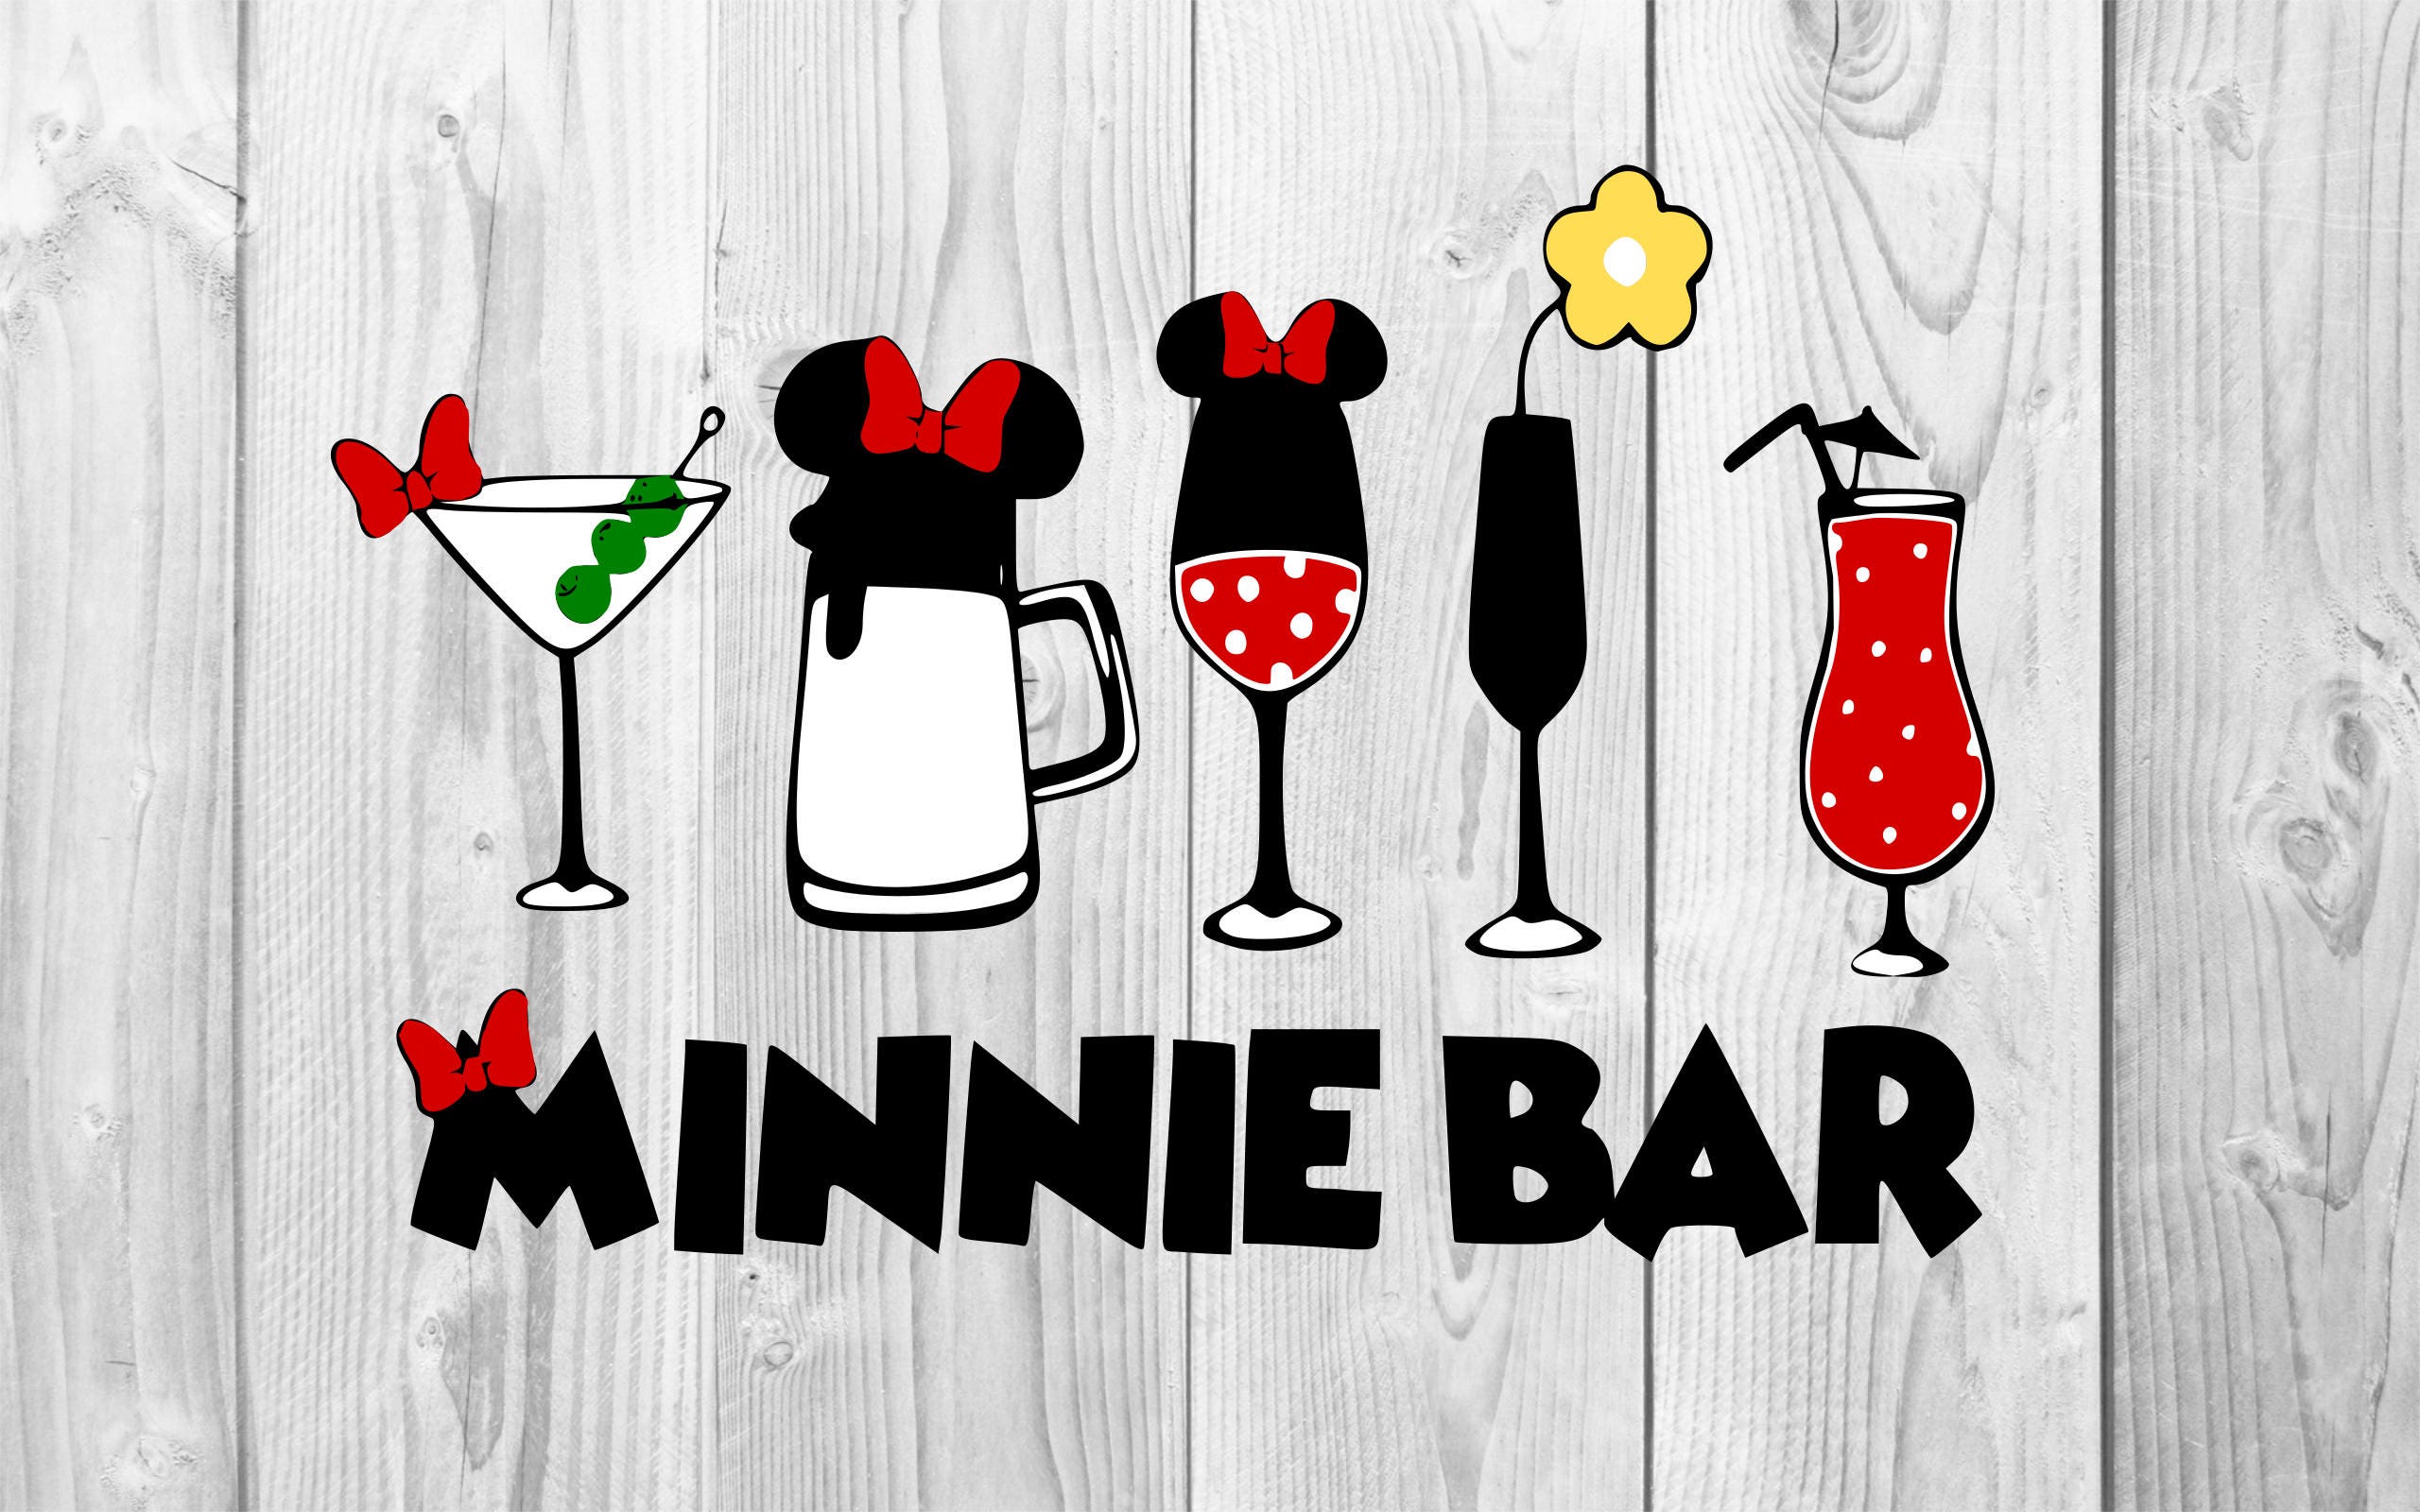 Download Disney Minnie Bar SVG DXF PNG cutting file Printable T-shirt